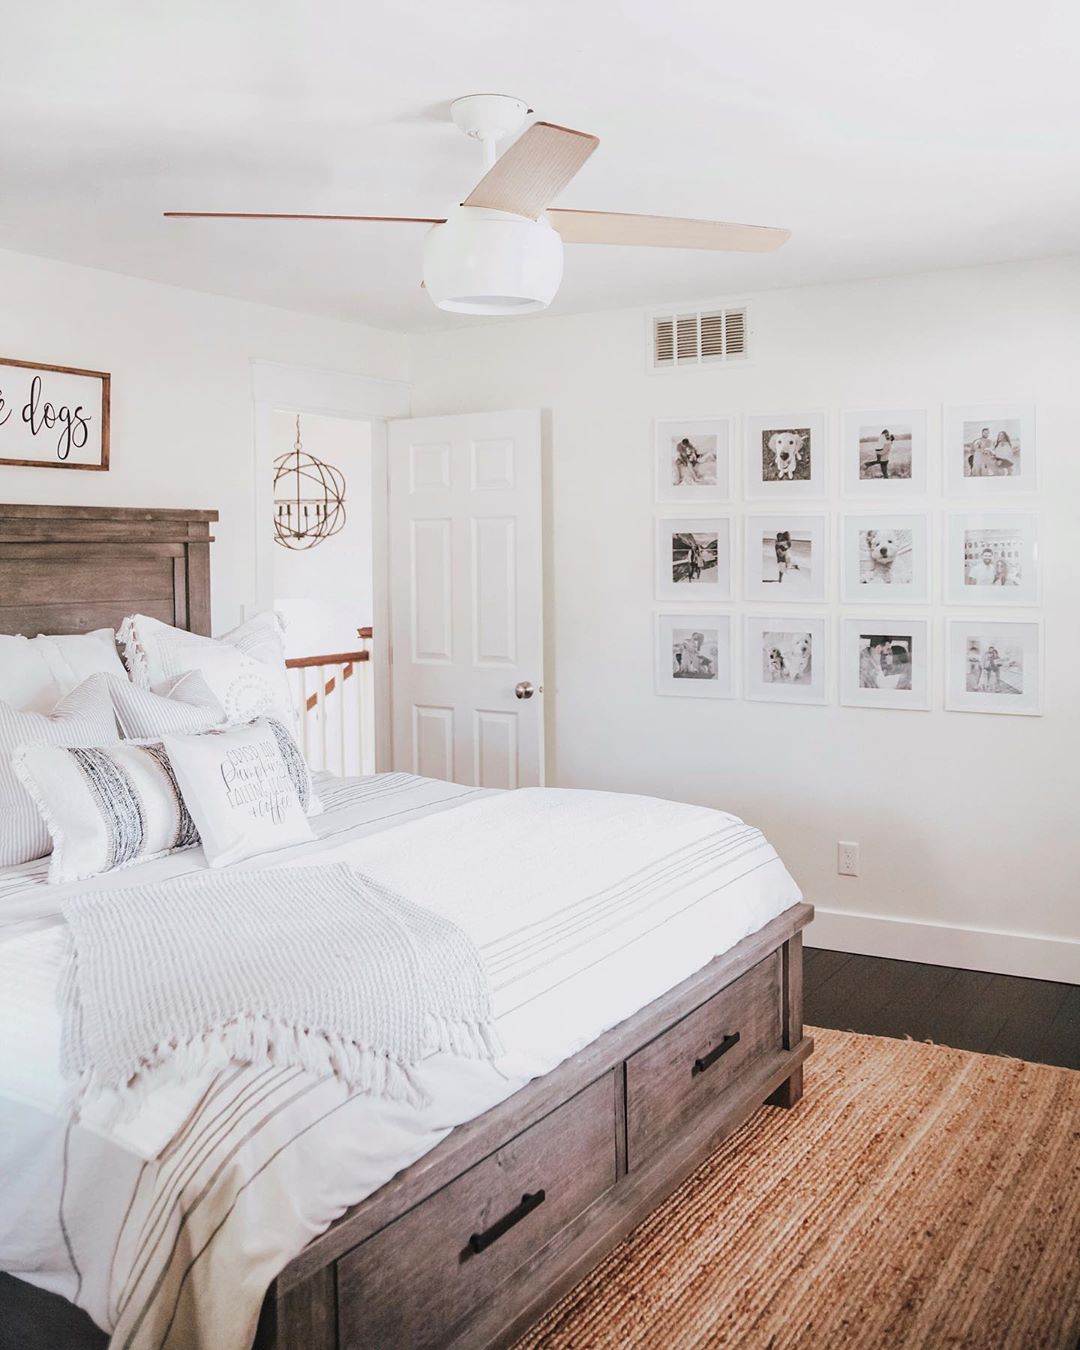 clean bedroom with gallery wall with dog photos and updated wood flooring photo by Instagram user @fashionablykay